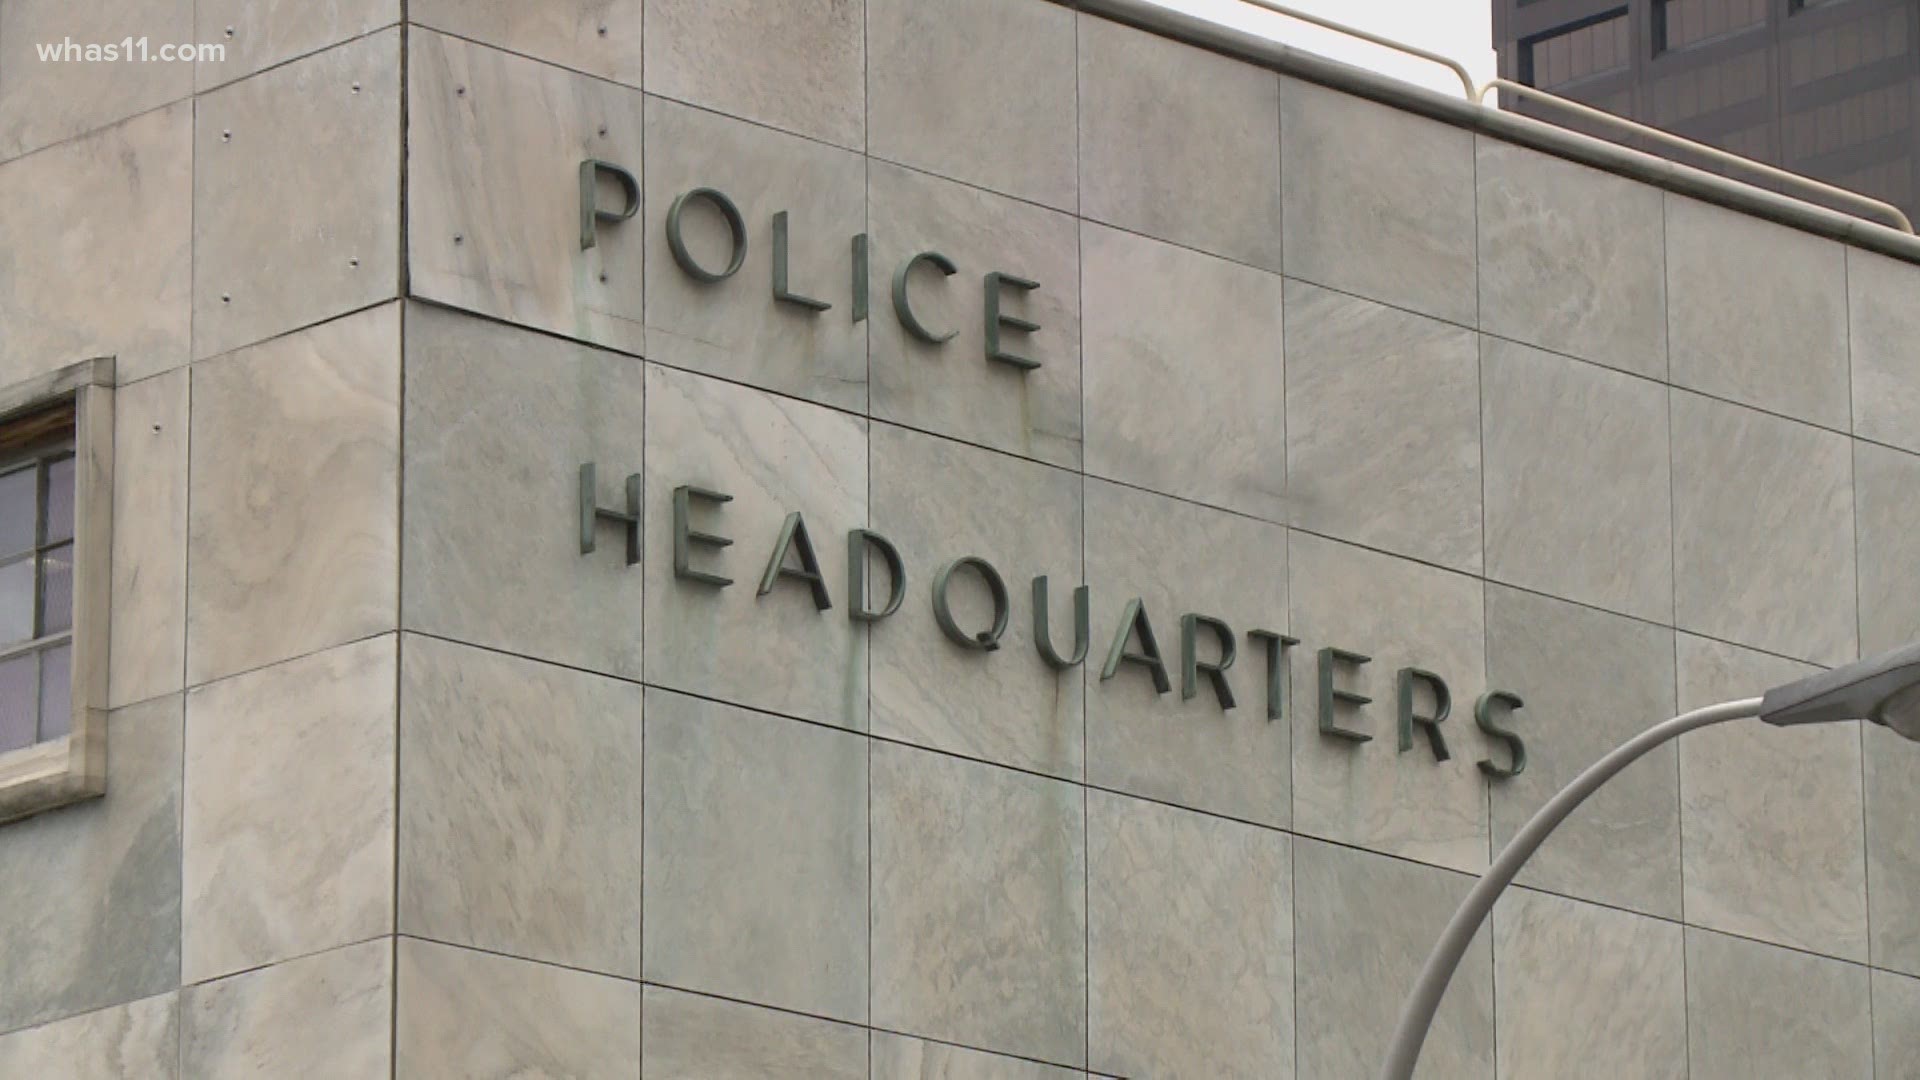 The board will consist of 11 members who will review complaints against LMPD officers, investigations involving critical incidents and the department's policies.